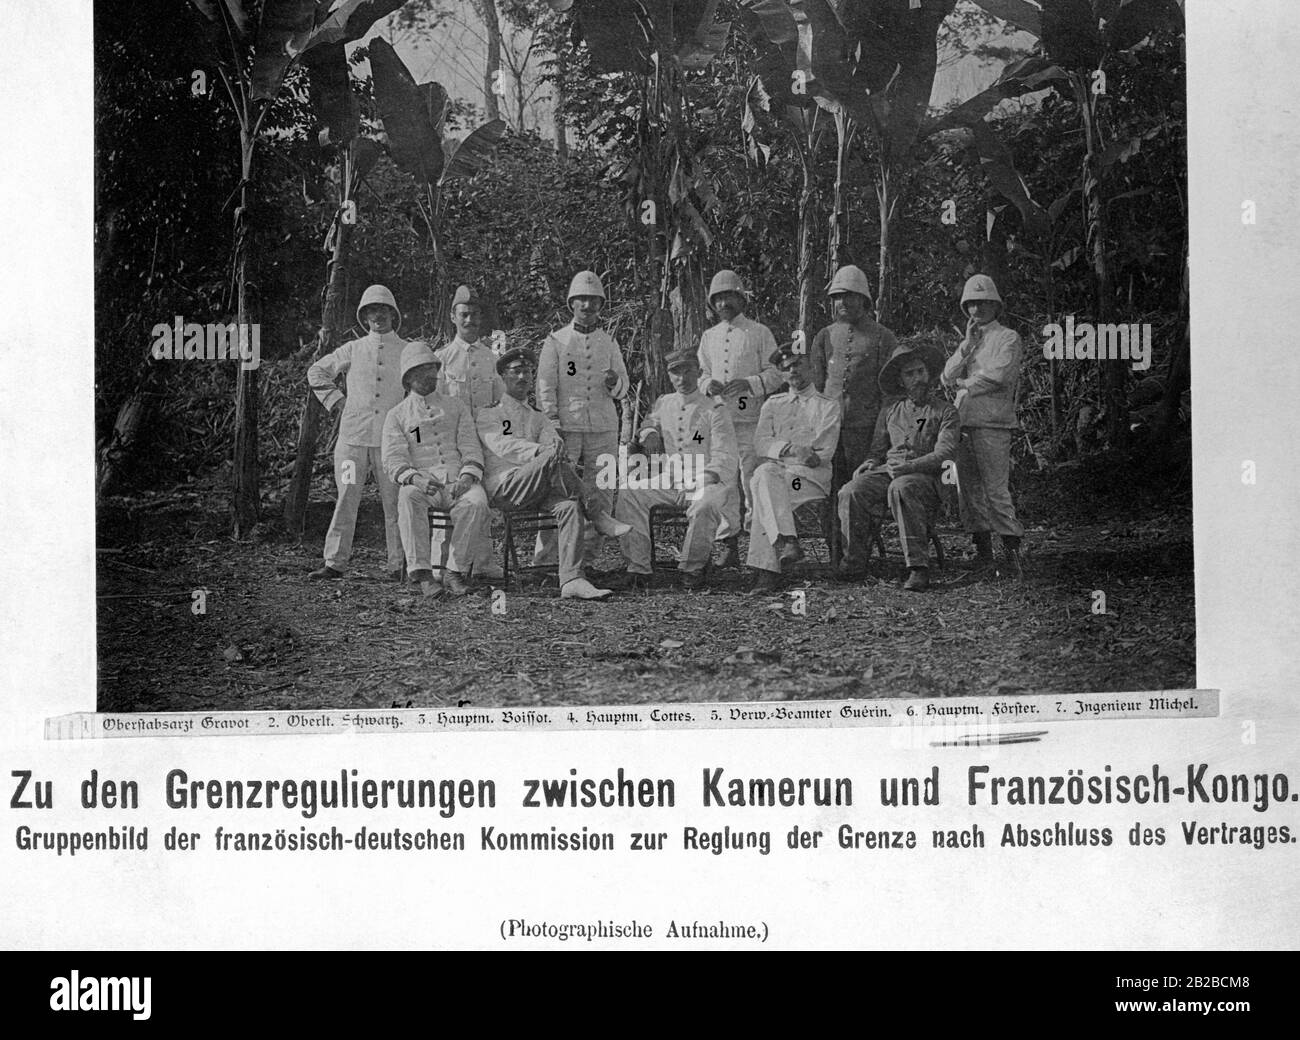 Group picture of the Franco-German Commission for the settlement of the border between the German colony of Cameroon and the French colony of Congo after the conclusion of the treaty. From left to right: Colonel Gravot (1), Lieutenant Colonel Schwartz (2), Captain Boissot (3), Captain Cottes (4), Administrative Officer Guerin (5), Captain Foerster (6), Engineer Michel (7). Stock Photo